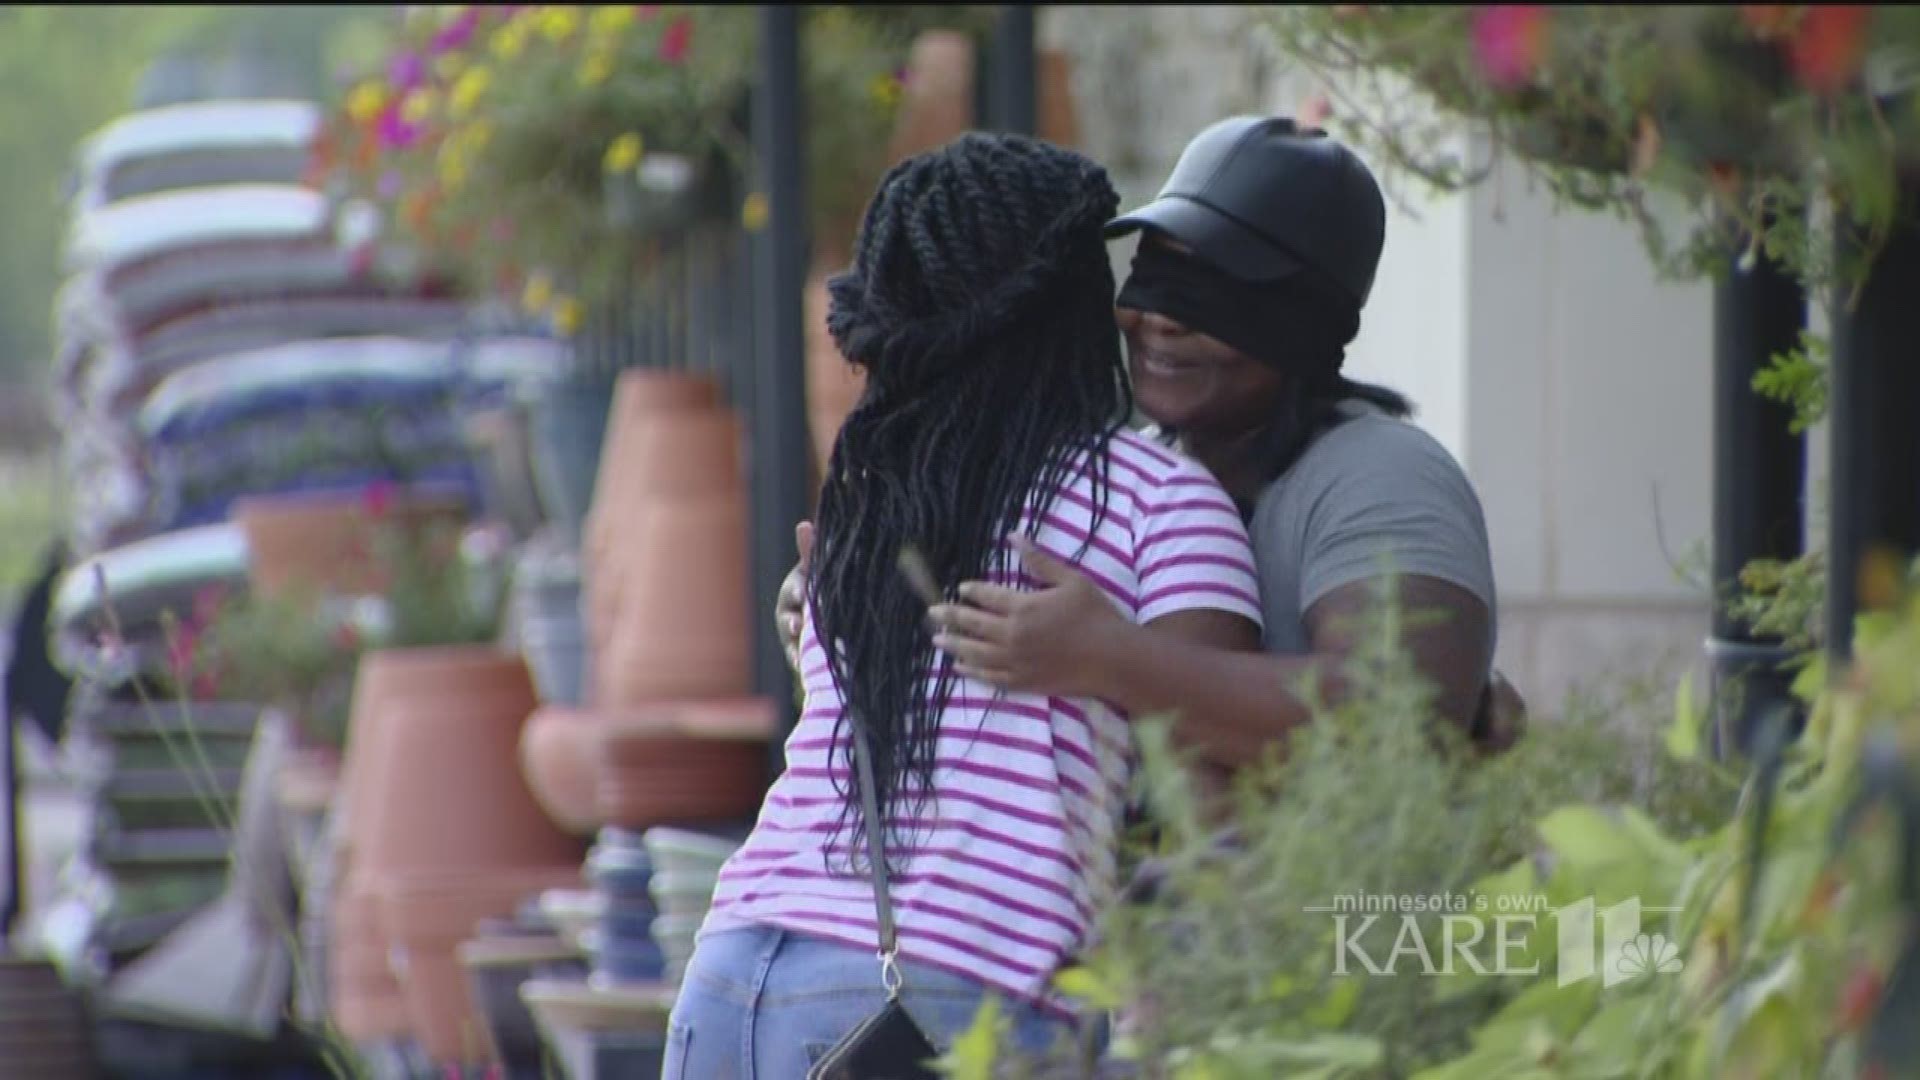 A week after Hurricane Harvey exacted its wrath, Shameka Carter stood near the entrance of a Houston grocery store, palms up, arms extended, giving hugs. Because Houston is hurting - and so is she. http://kare11.tv/2iSOZTX